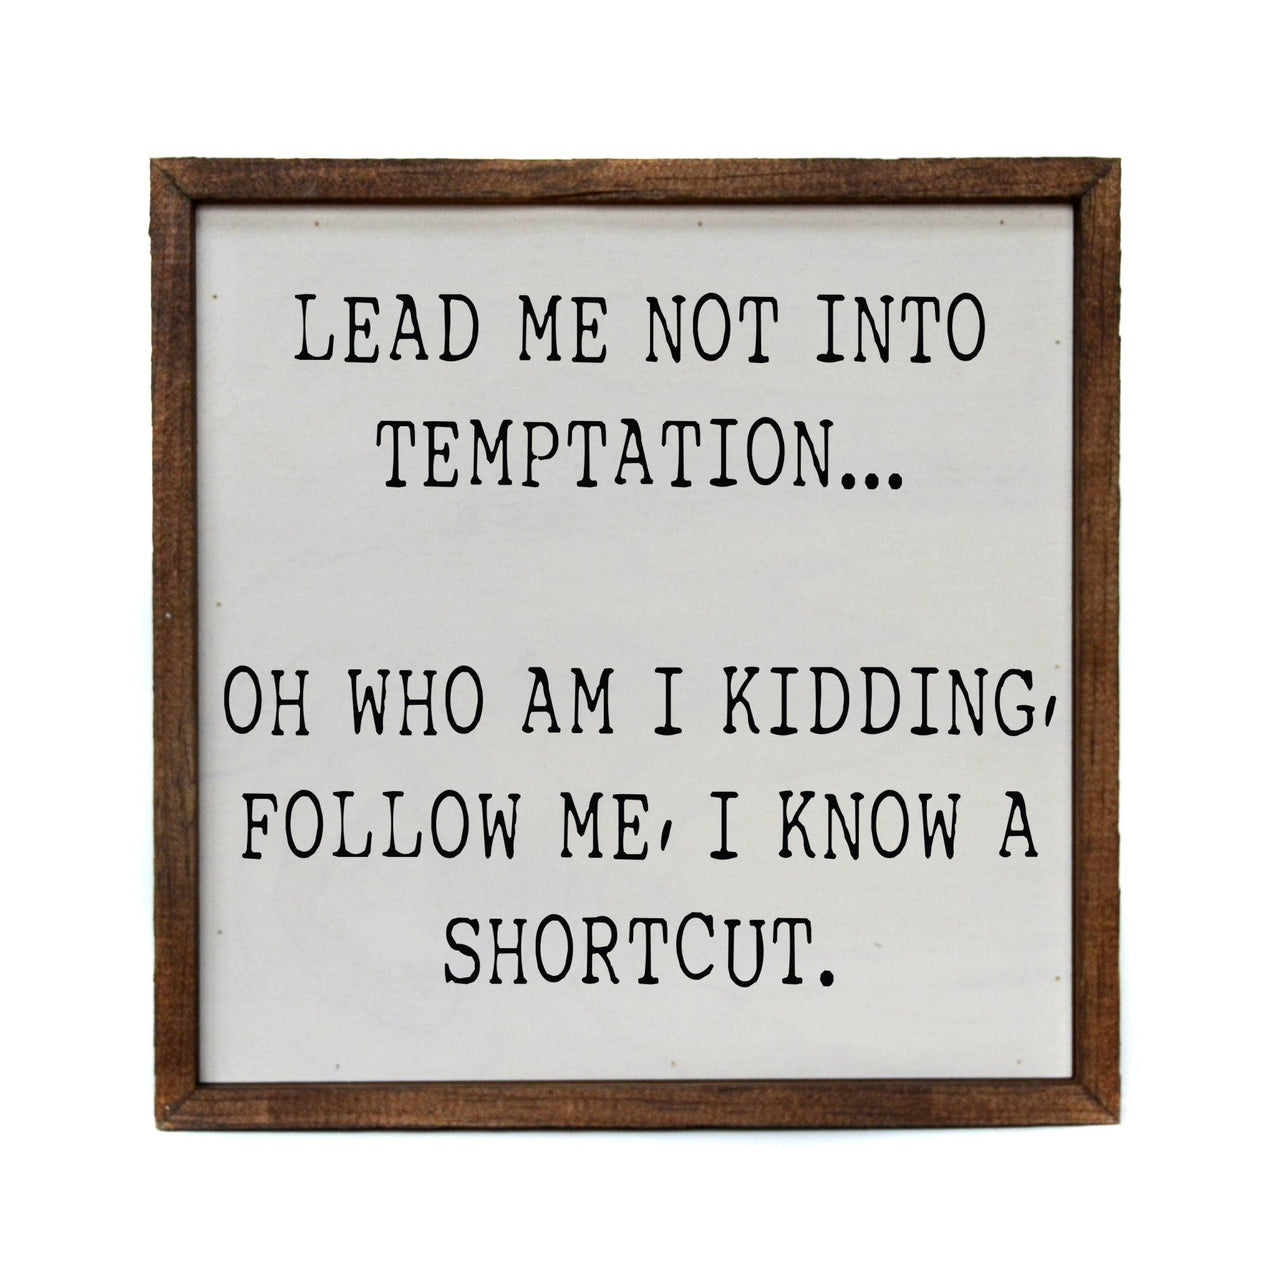 Driftless Studios - 10x10 Lead Me Into Temptation... Oh Who Am I Kidding Sign - Rubbish Restyled